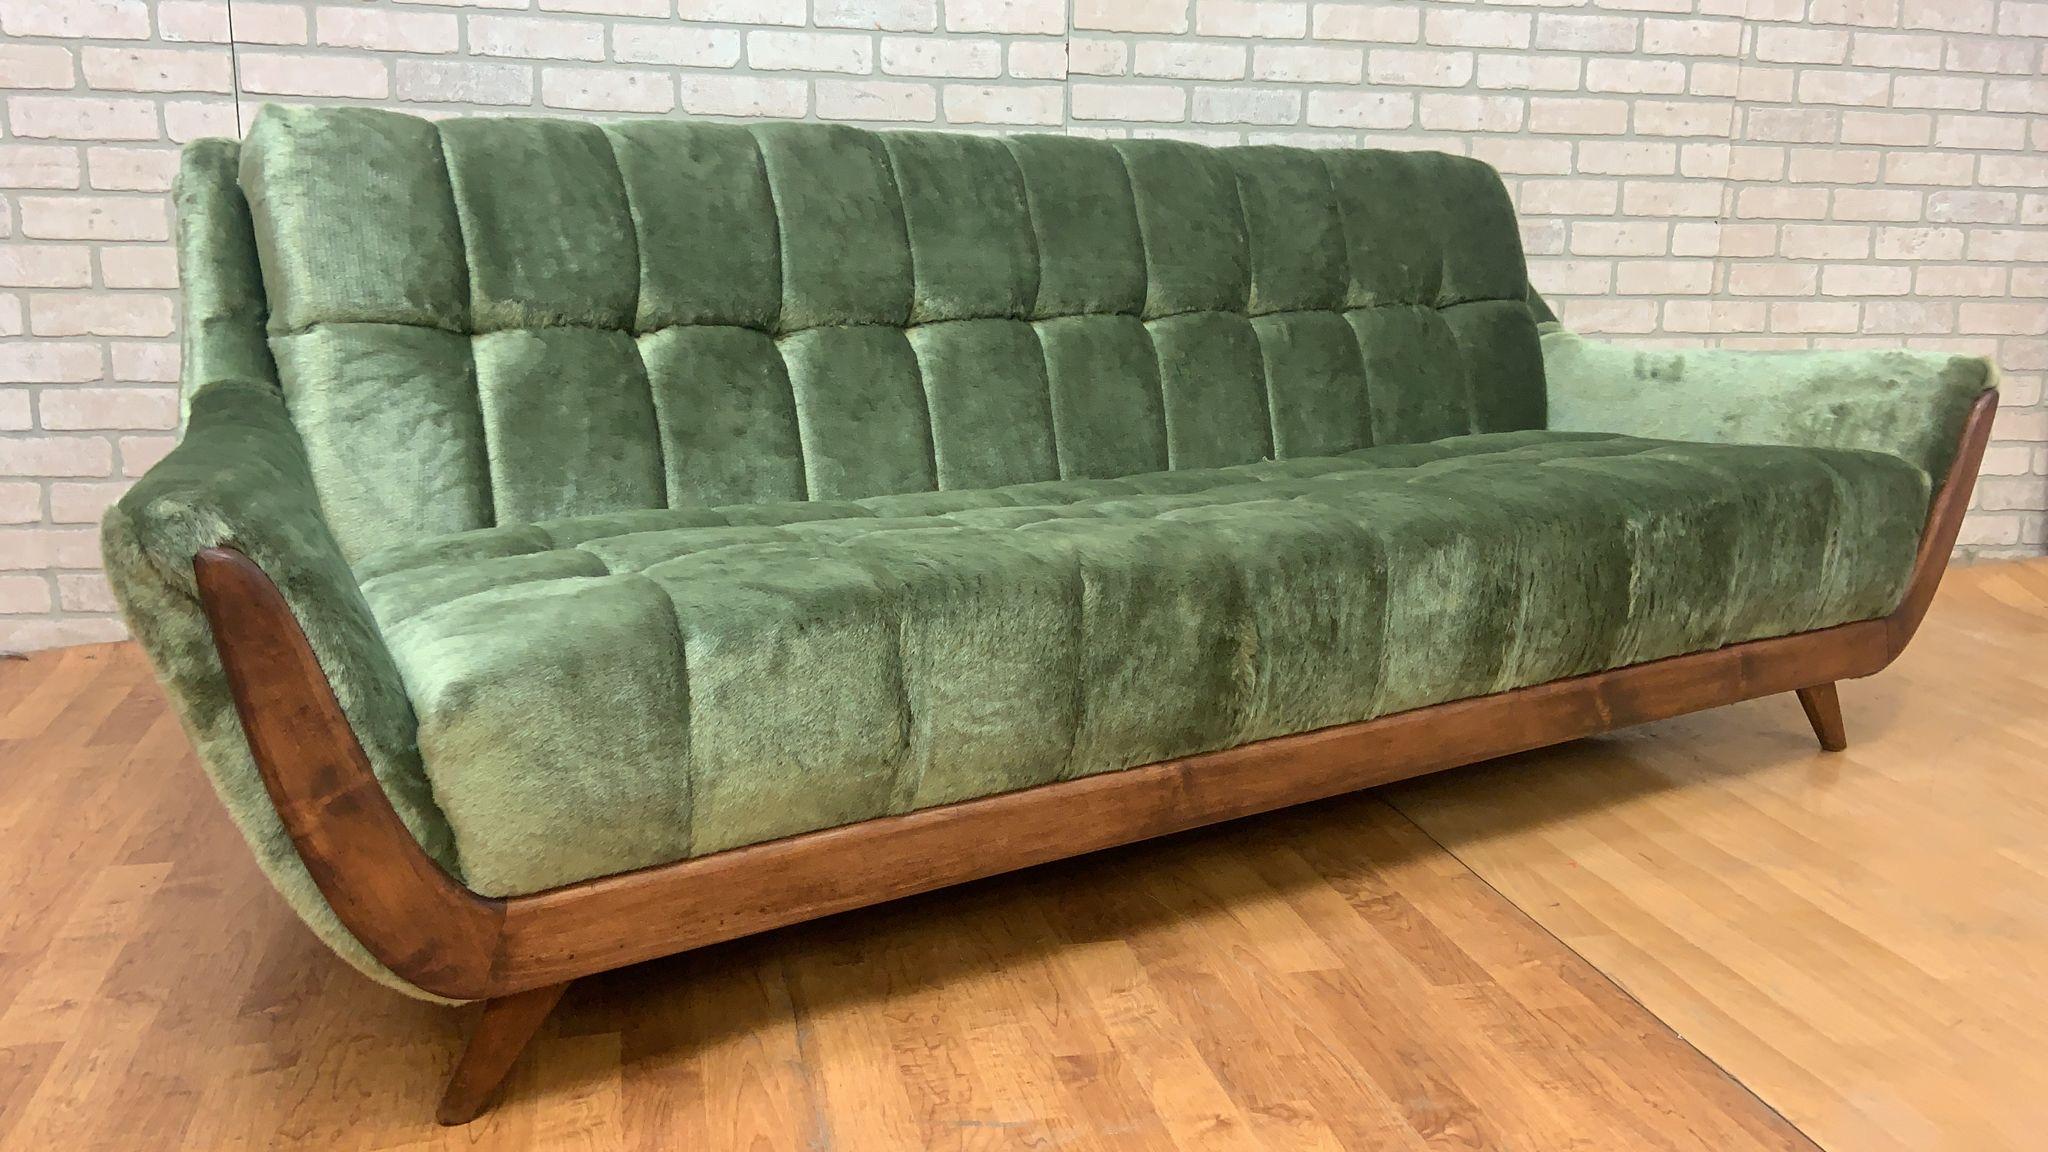 Mid Century Modern Adrian Pearsall Style Walnut Framed Gondola Sofa Newly Upholstered in Plush Emerald Box Tufted Shag Fabric

This mid century modern Adrian Pearsall walnut framed tufted Gondola sofa is a stylish and classic piece that will elevate